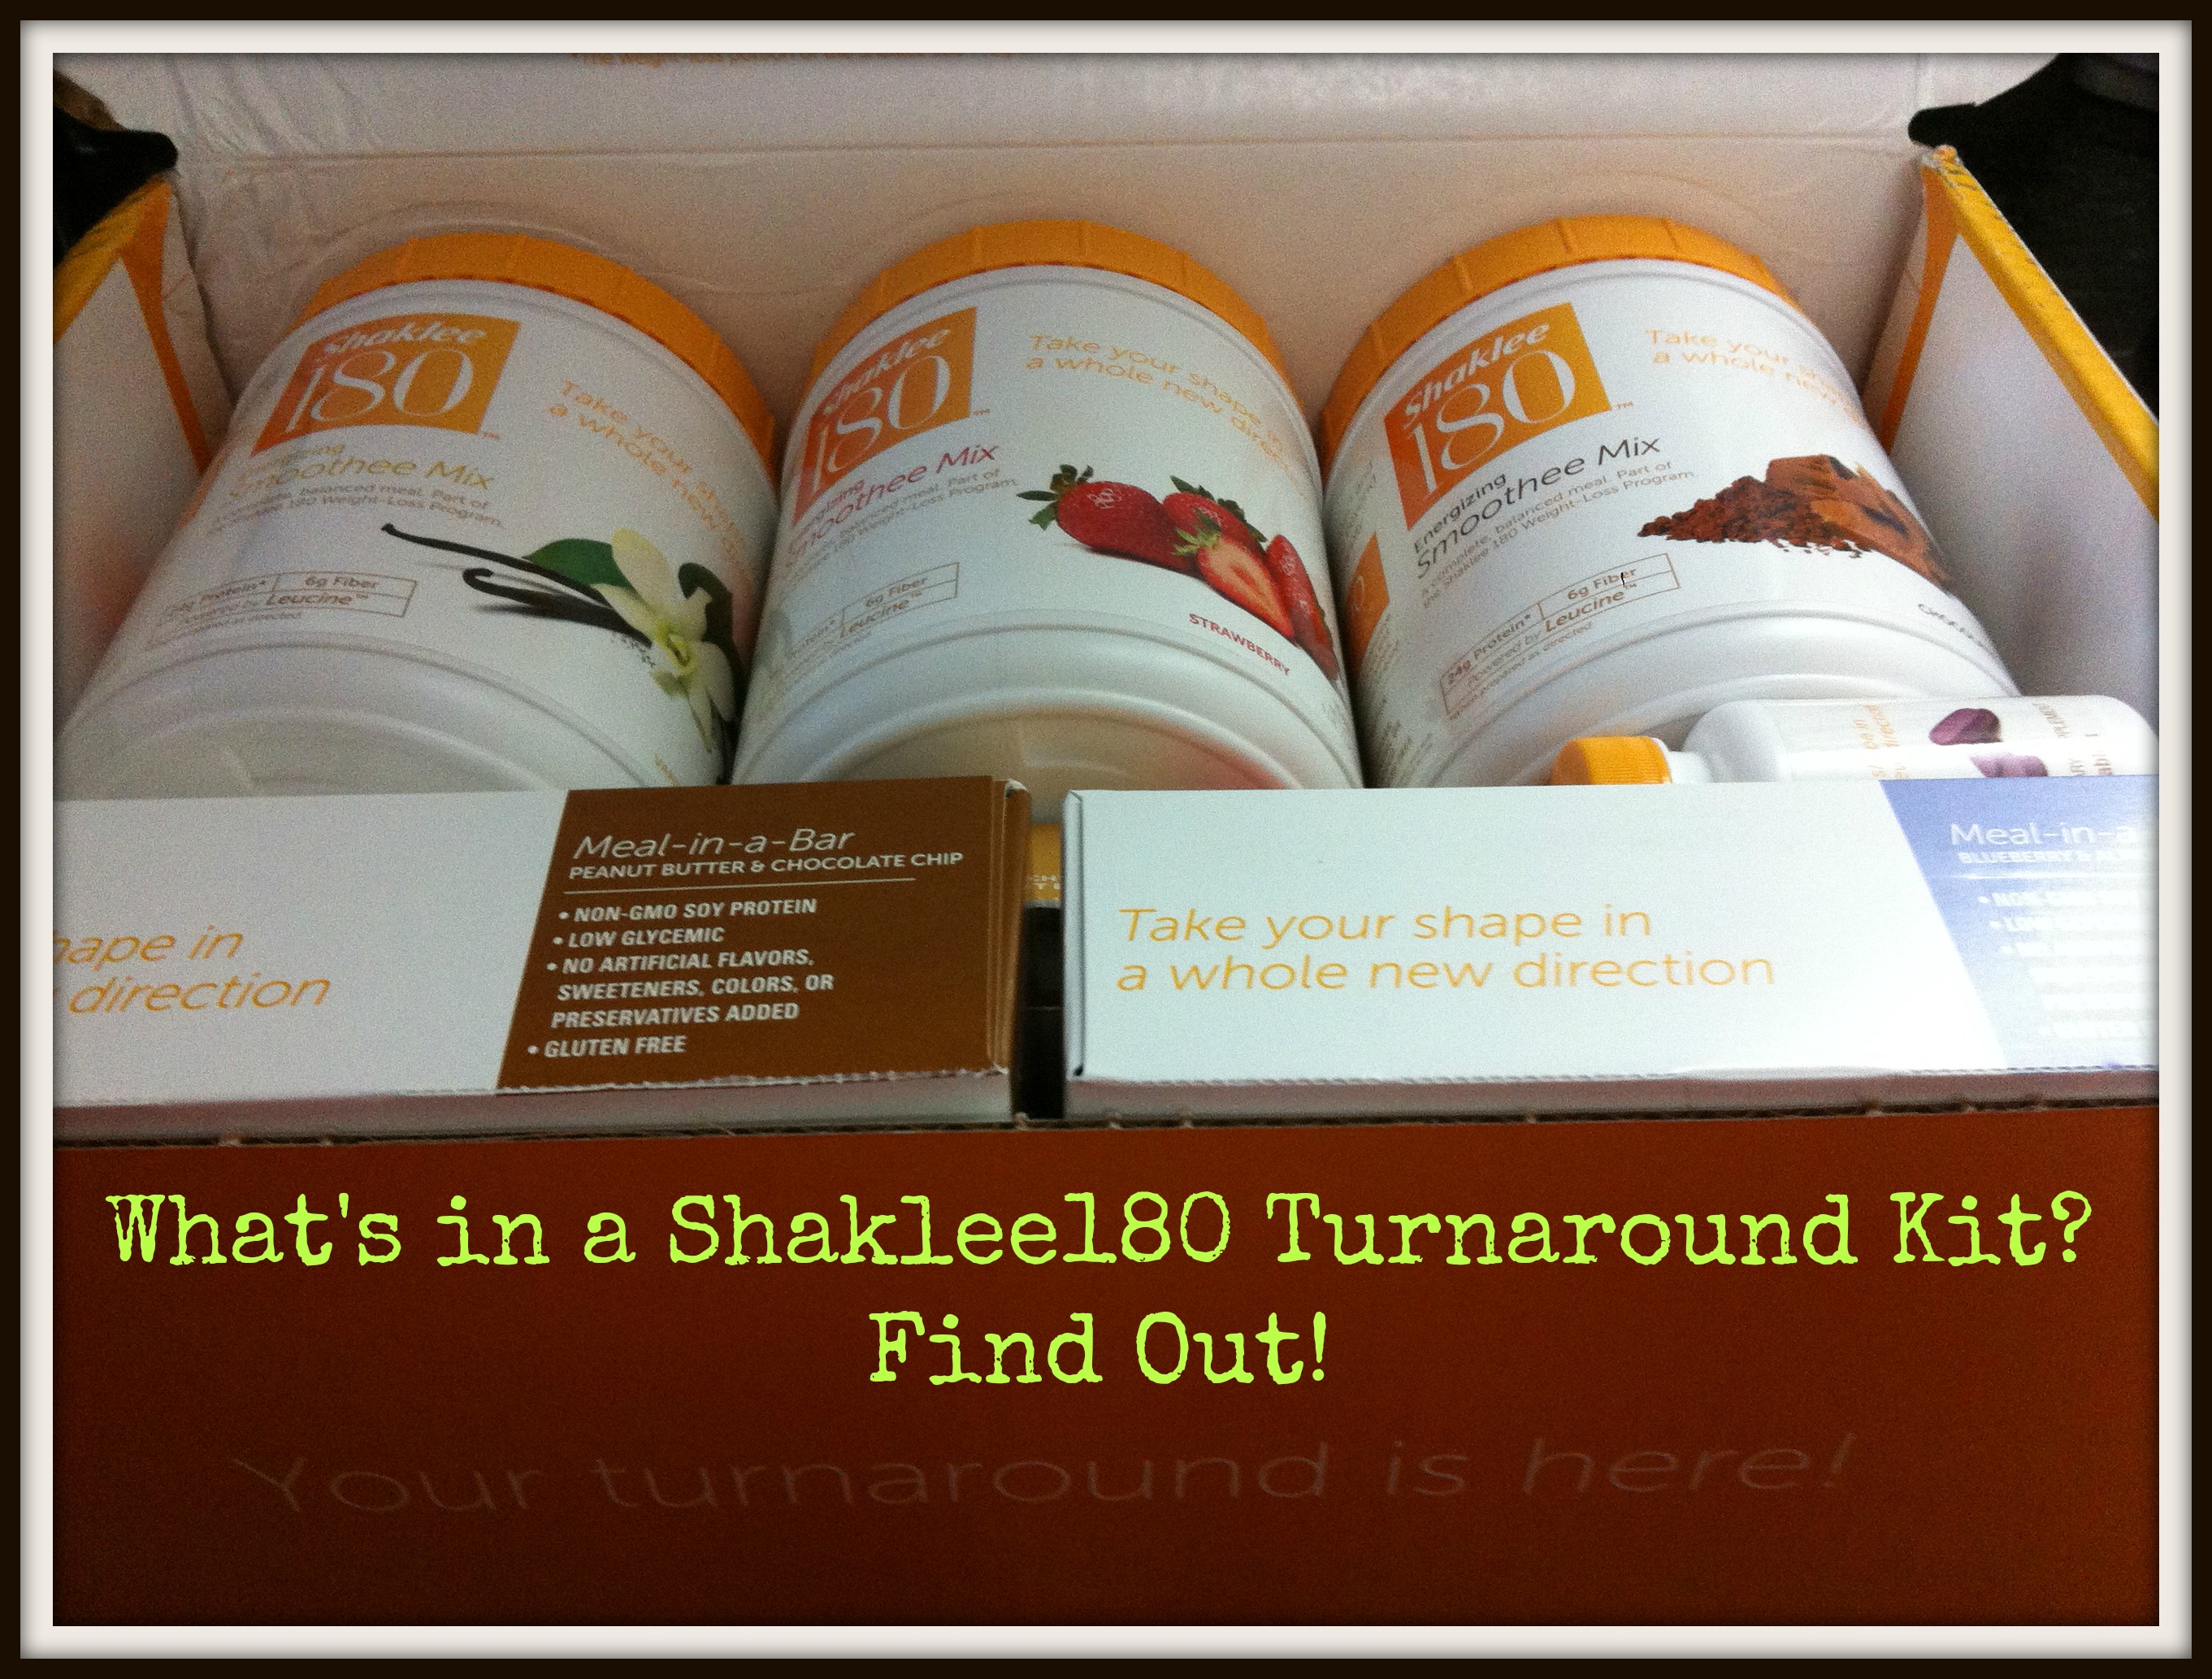 What’s in a Shaklee180 Turnaround Kit?